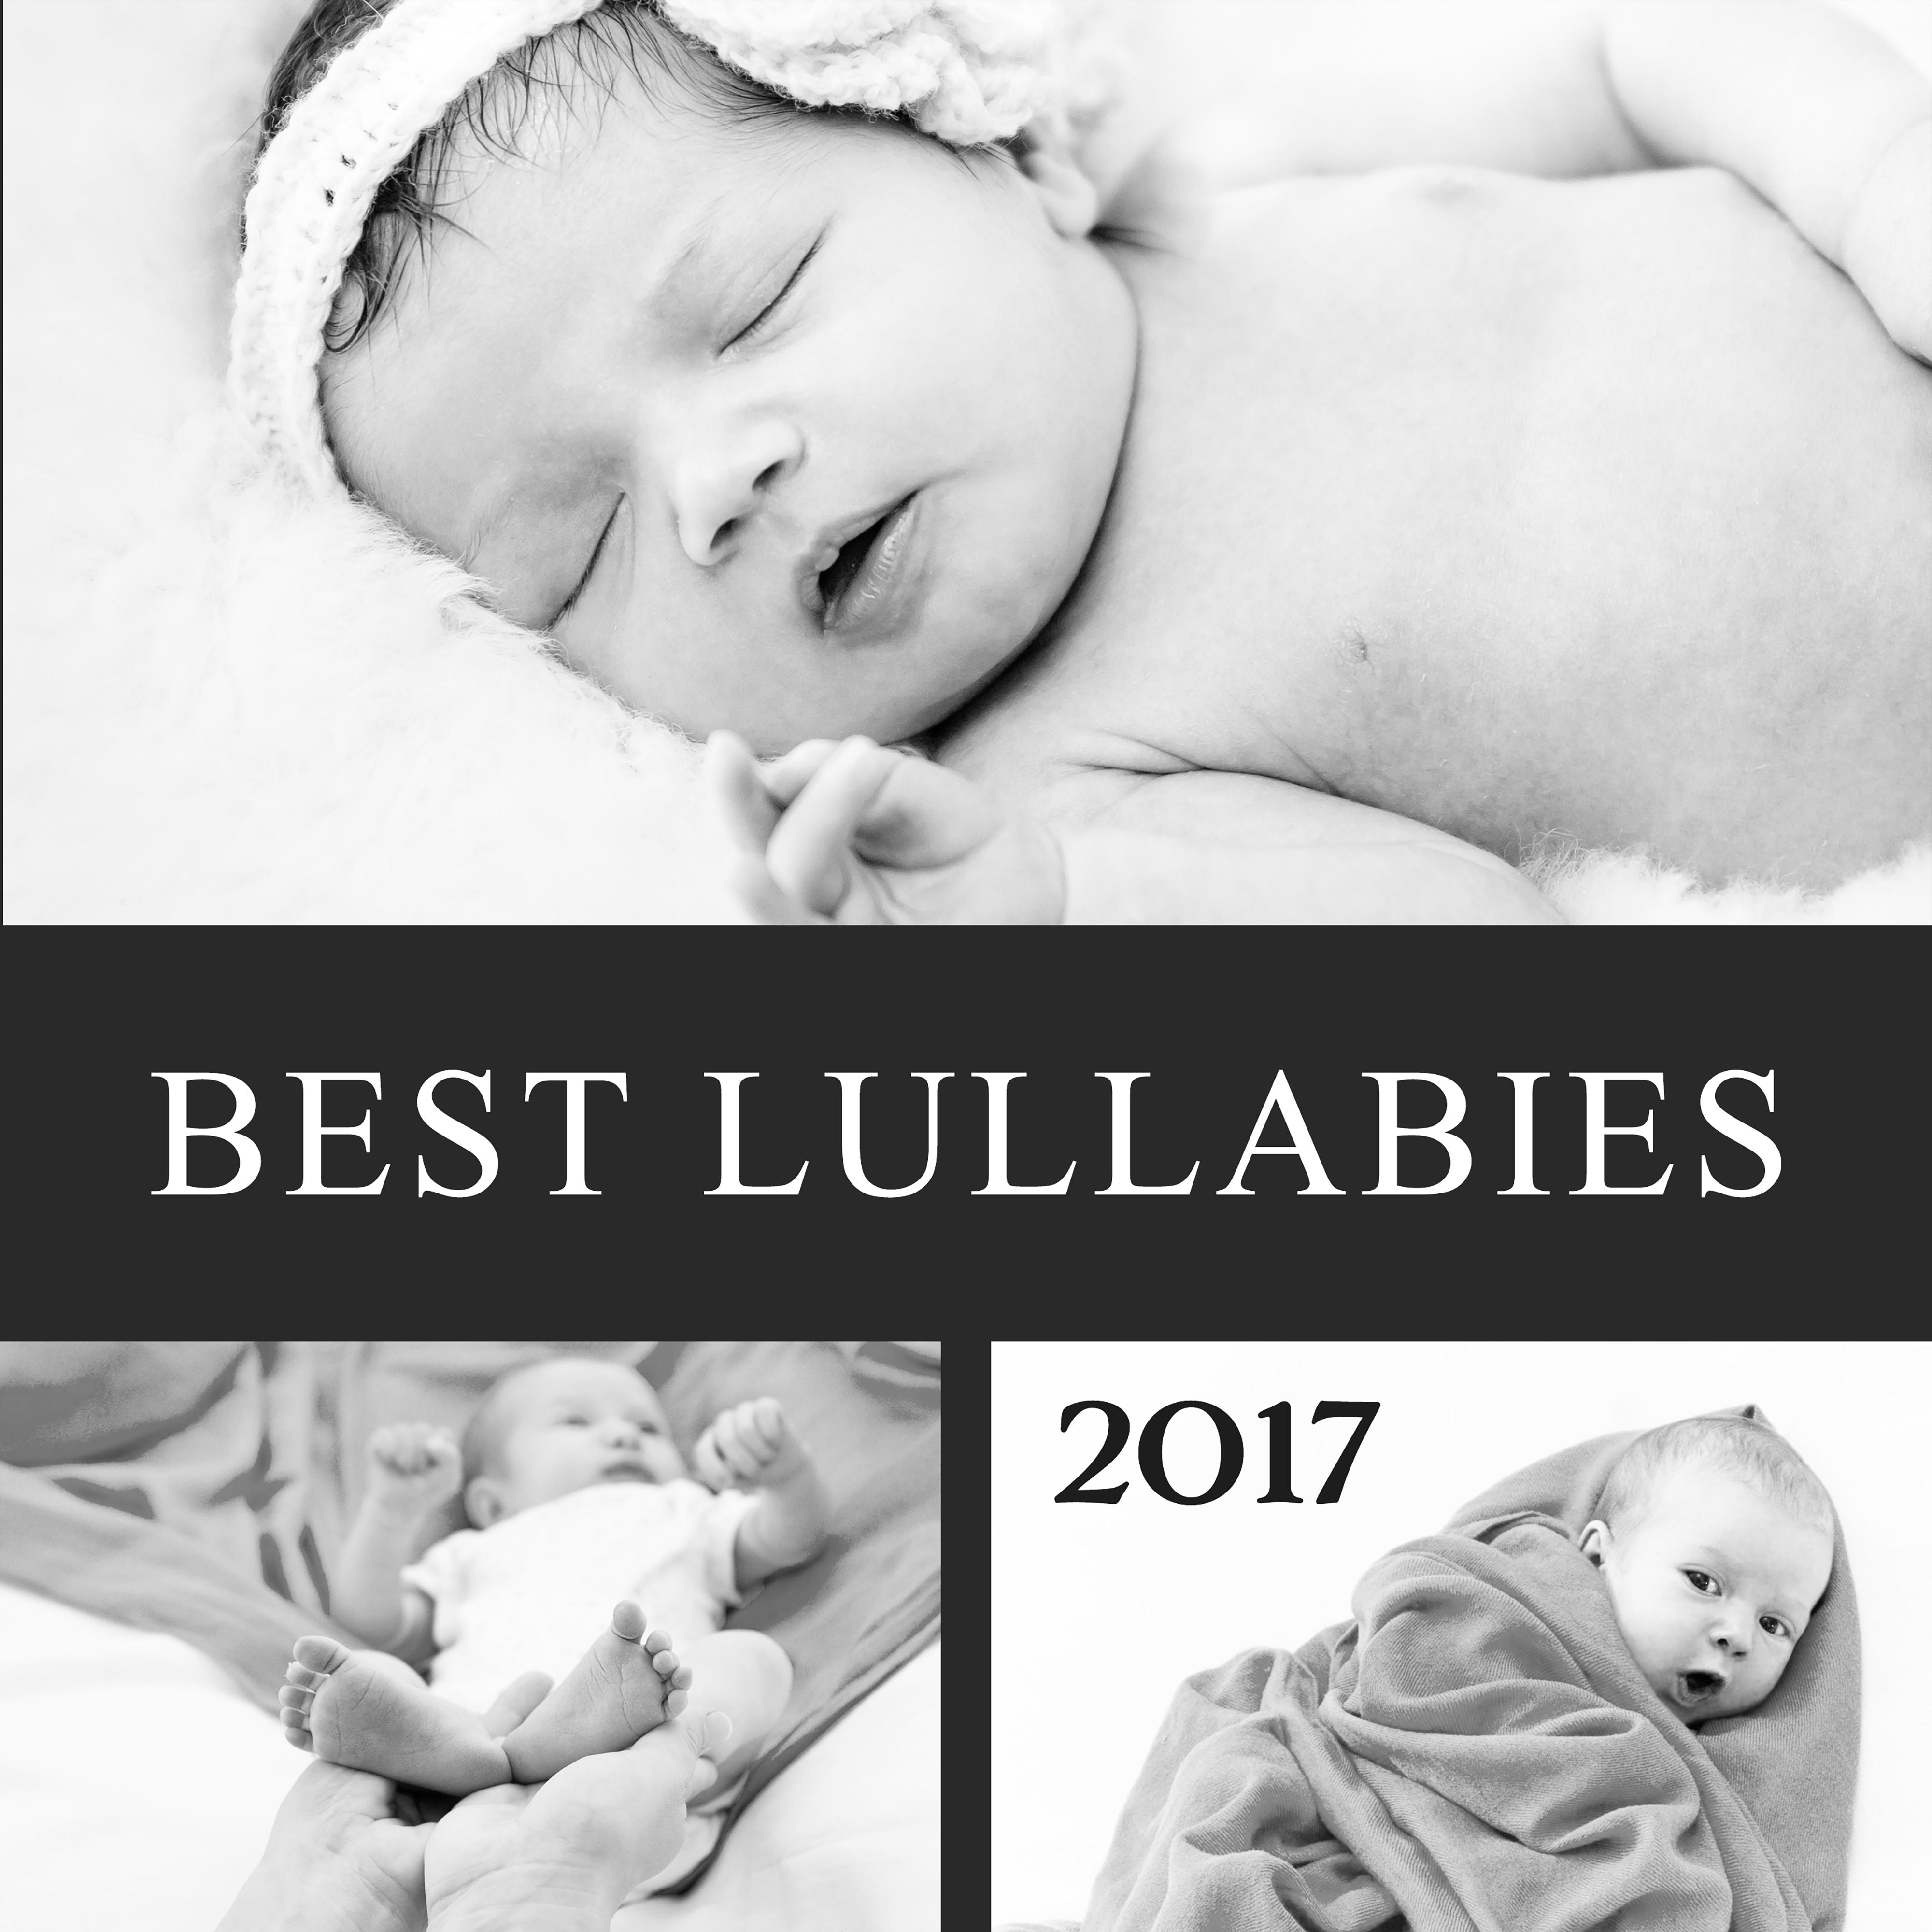 Best Lullabies 2017  Peaceful Music for Baby, Restful Sleep, Stress Relief, Classical Sounds to Bed